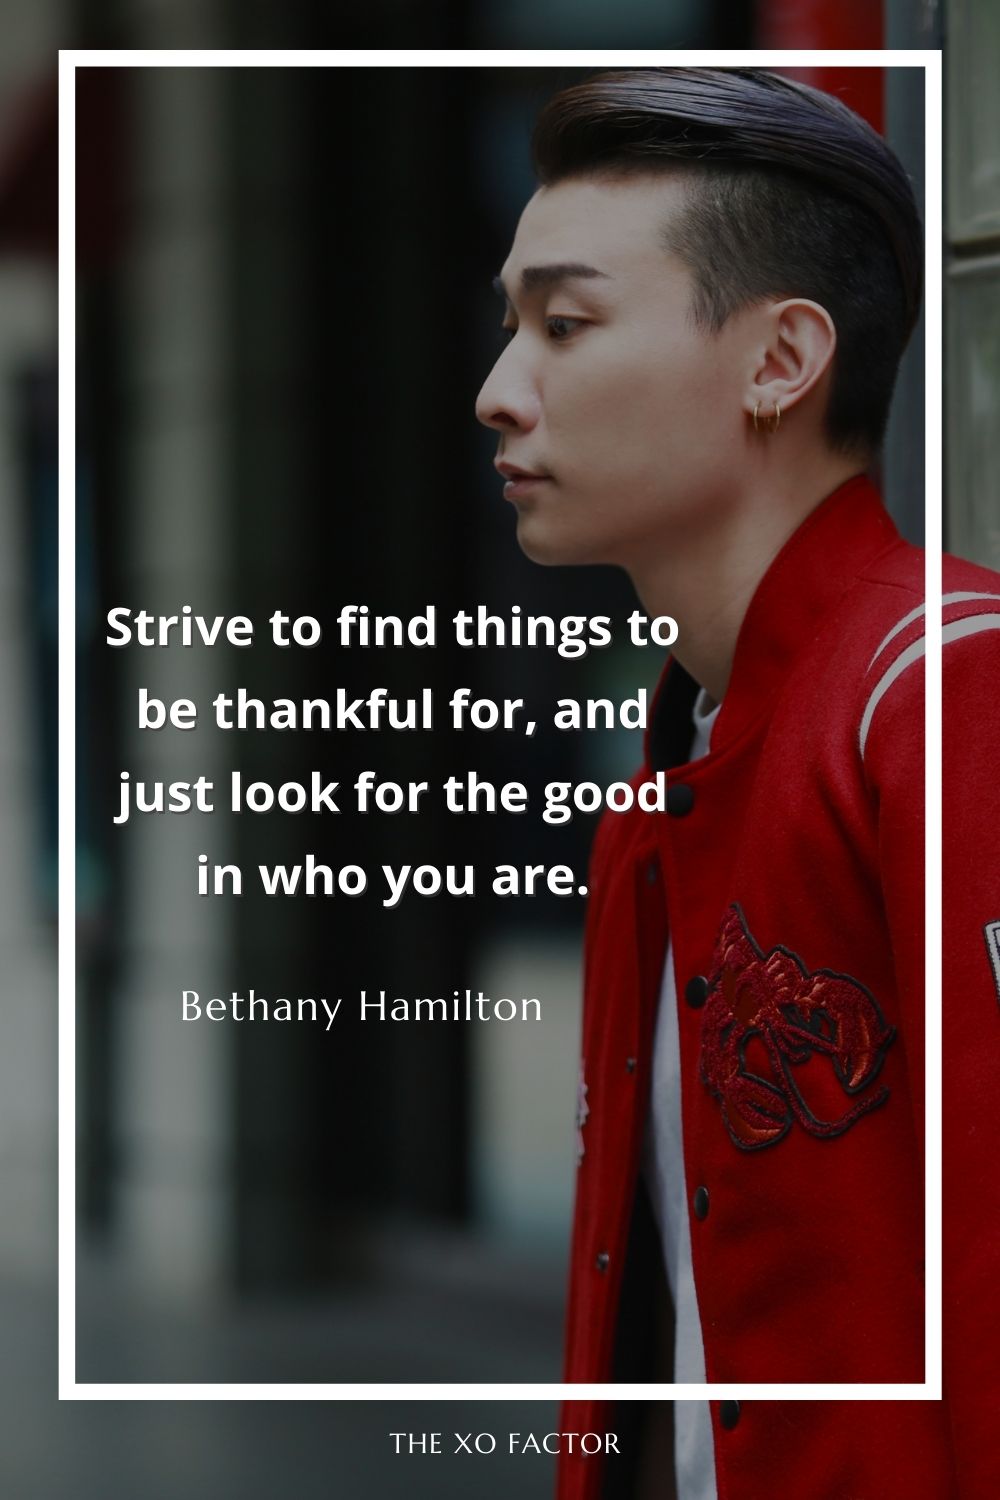 Strive to find things to be thankful for, and just look for the good in who you are.